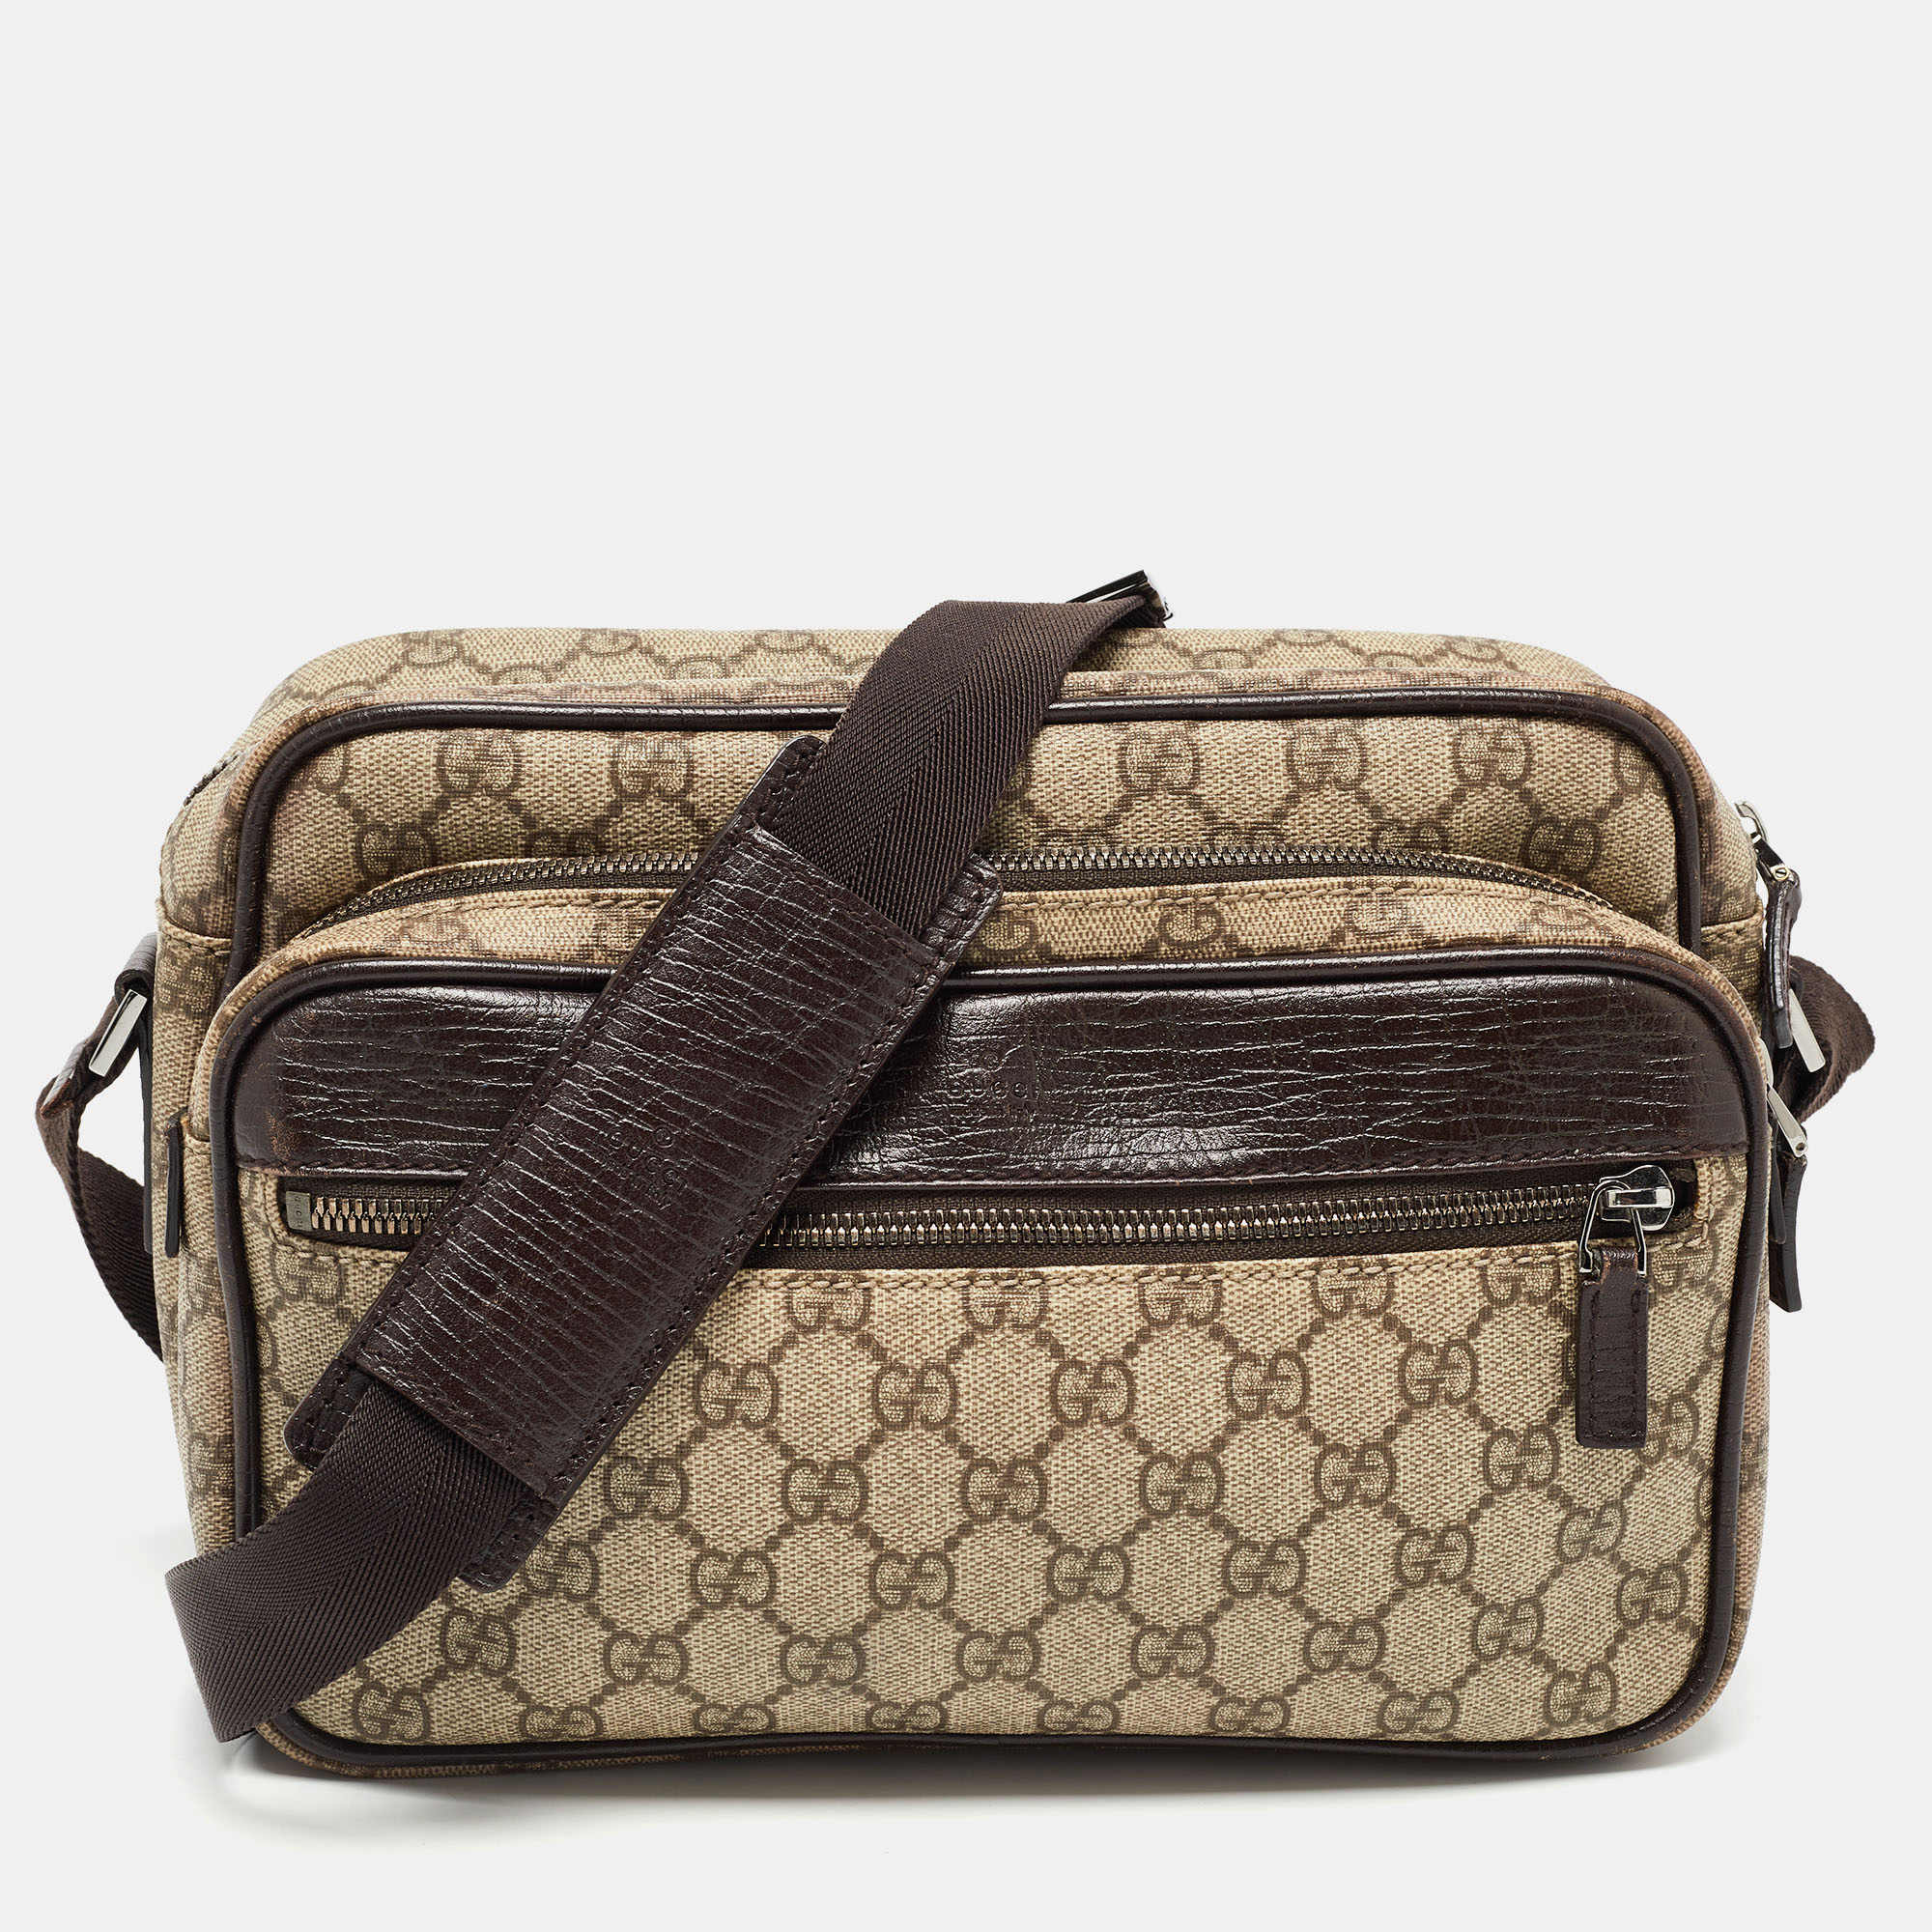 Pre-owned Gucci Brown/beige Gg Supreme Canvas Crossbody Bag